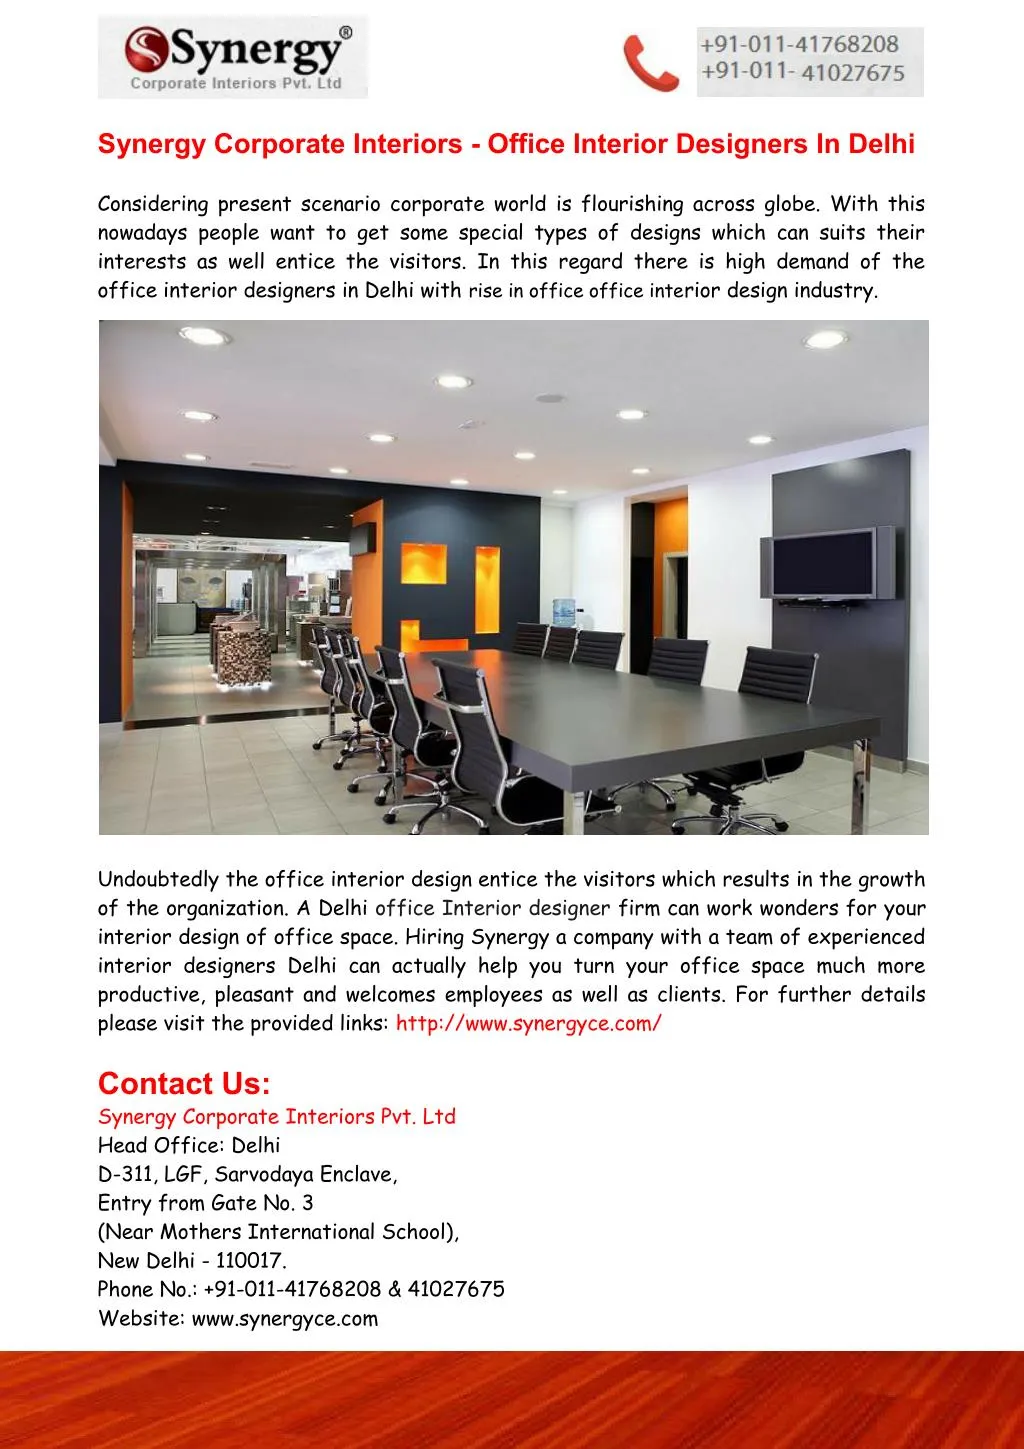 synergy corporate interiors office interior n.